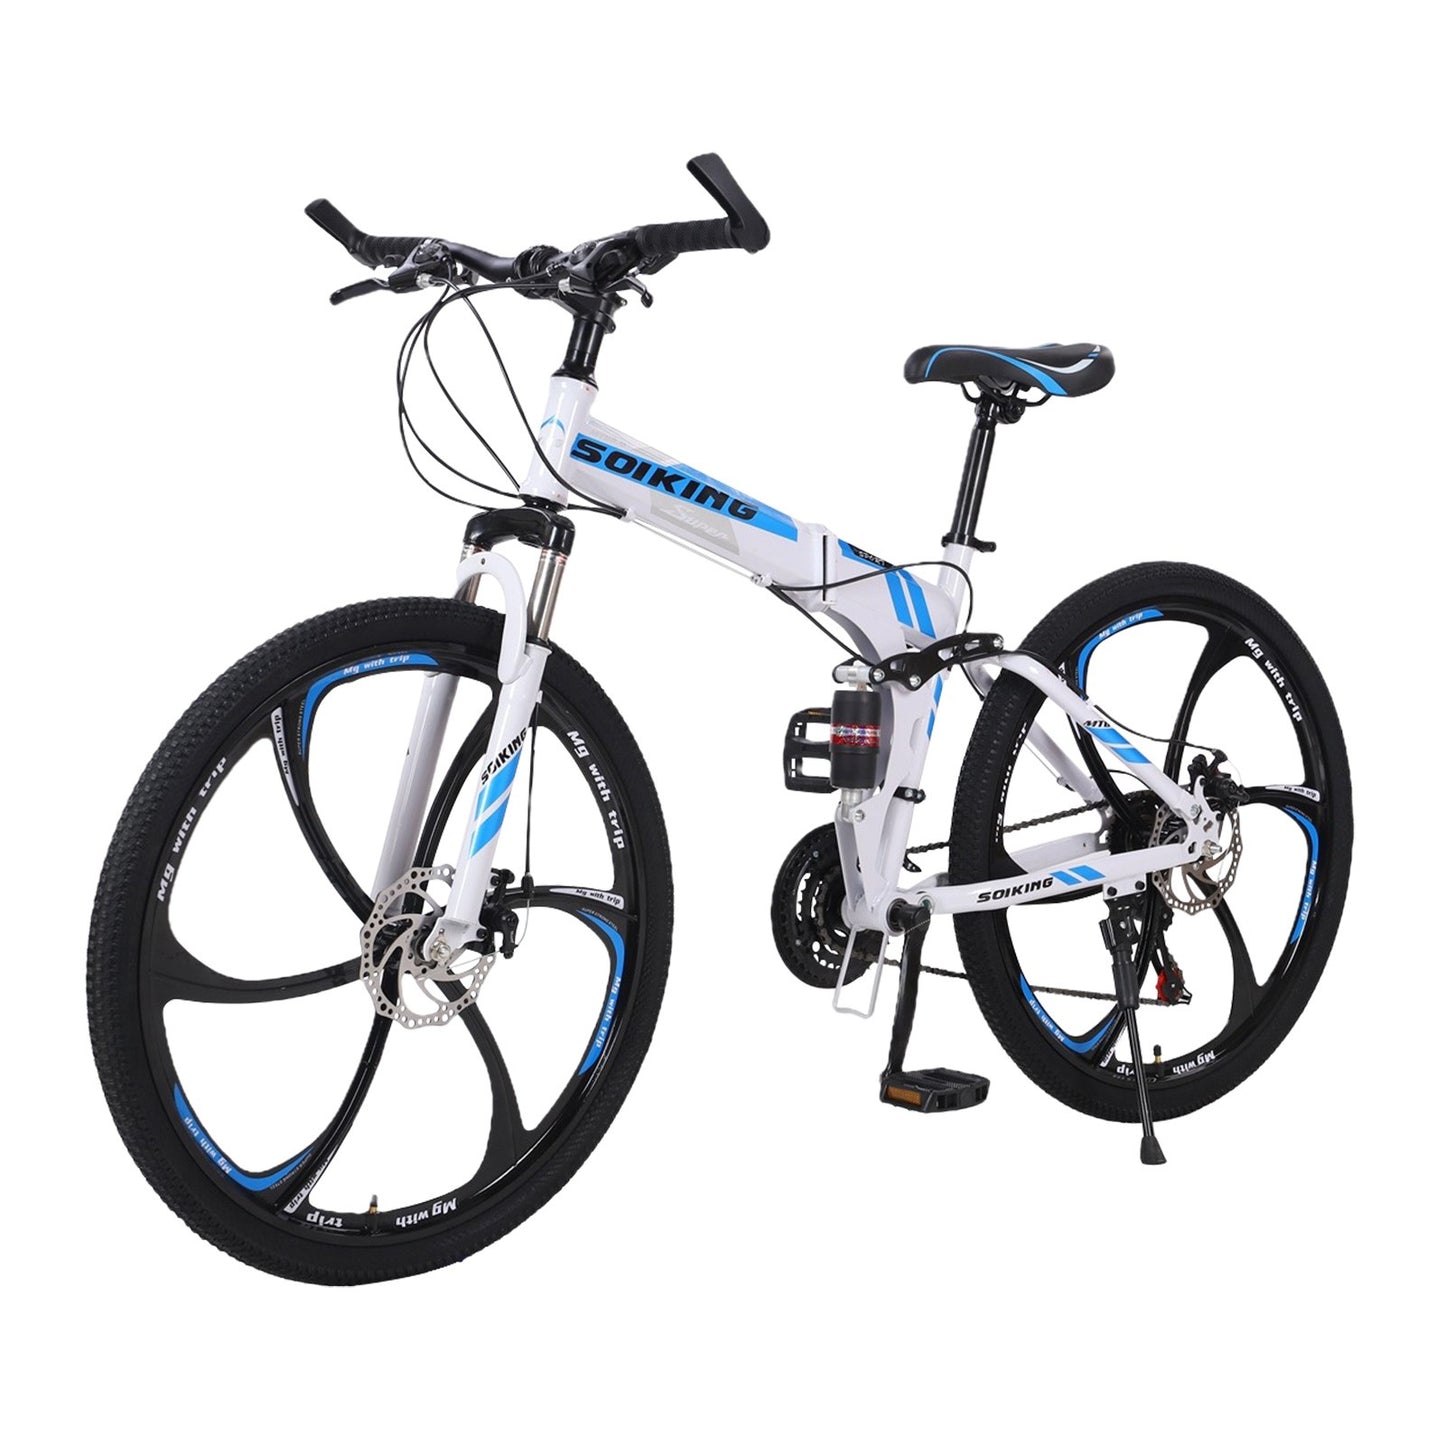 26in Folding Mountain bike with full suspension